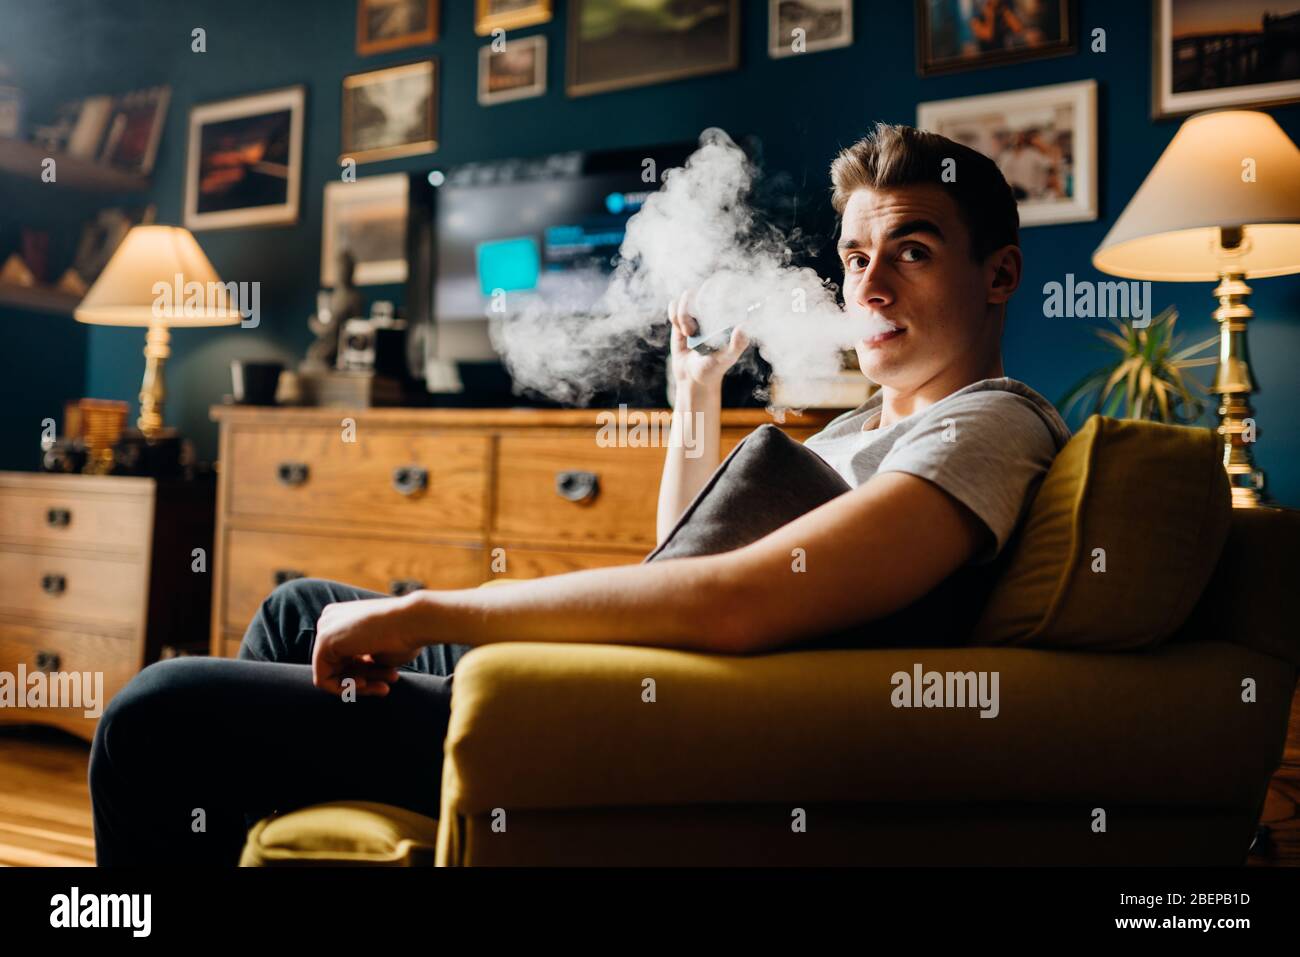 Exhaling the vapor with electronic cigarette.Puffing clouds of smoke.Vape flavor liquid chemicals.Use of e-cigarettes in the home.Smoking and vaping n Stock Photo